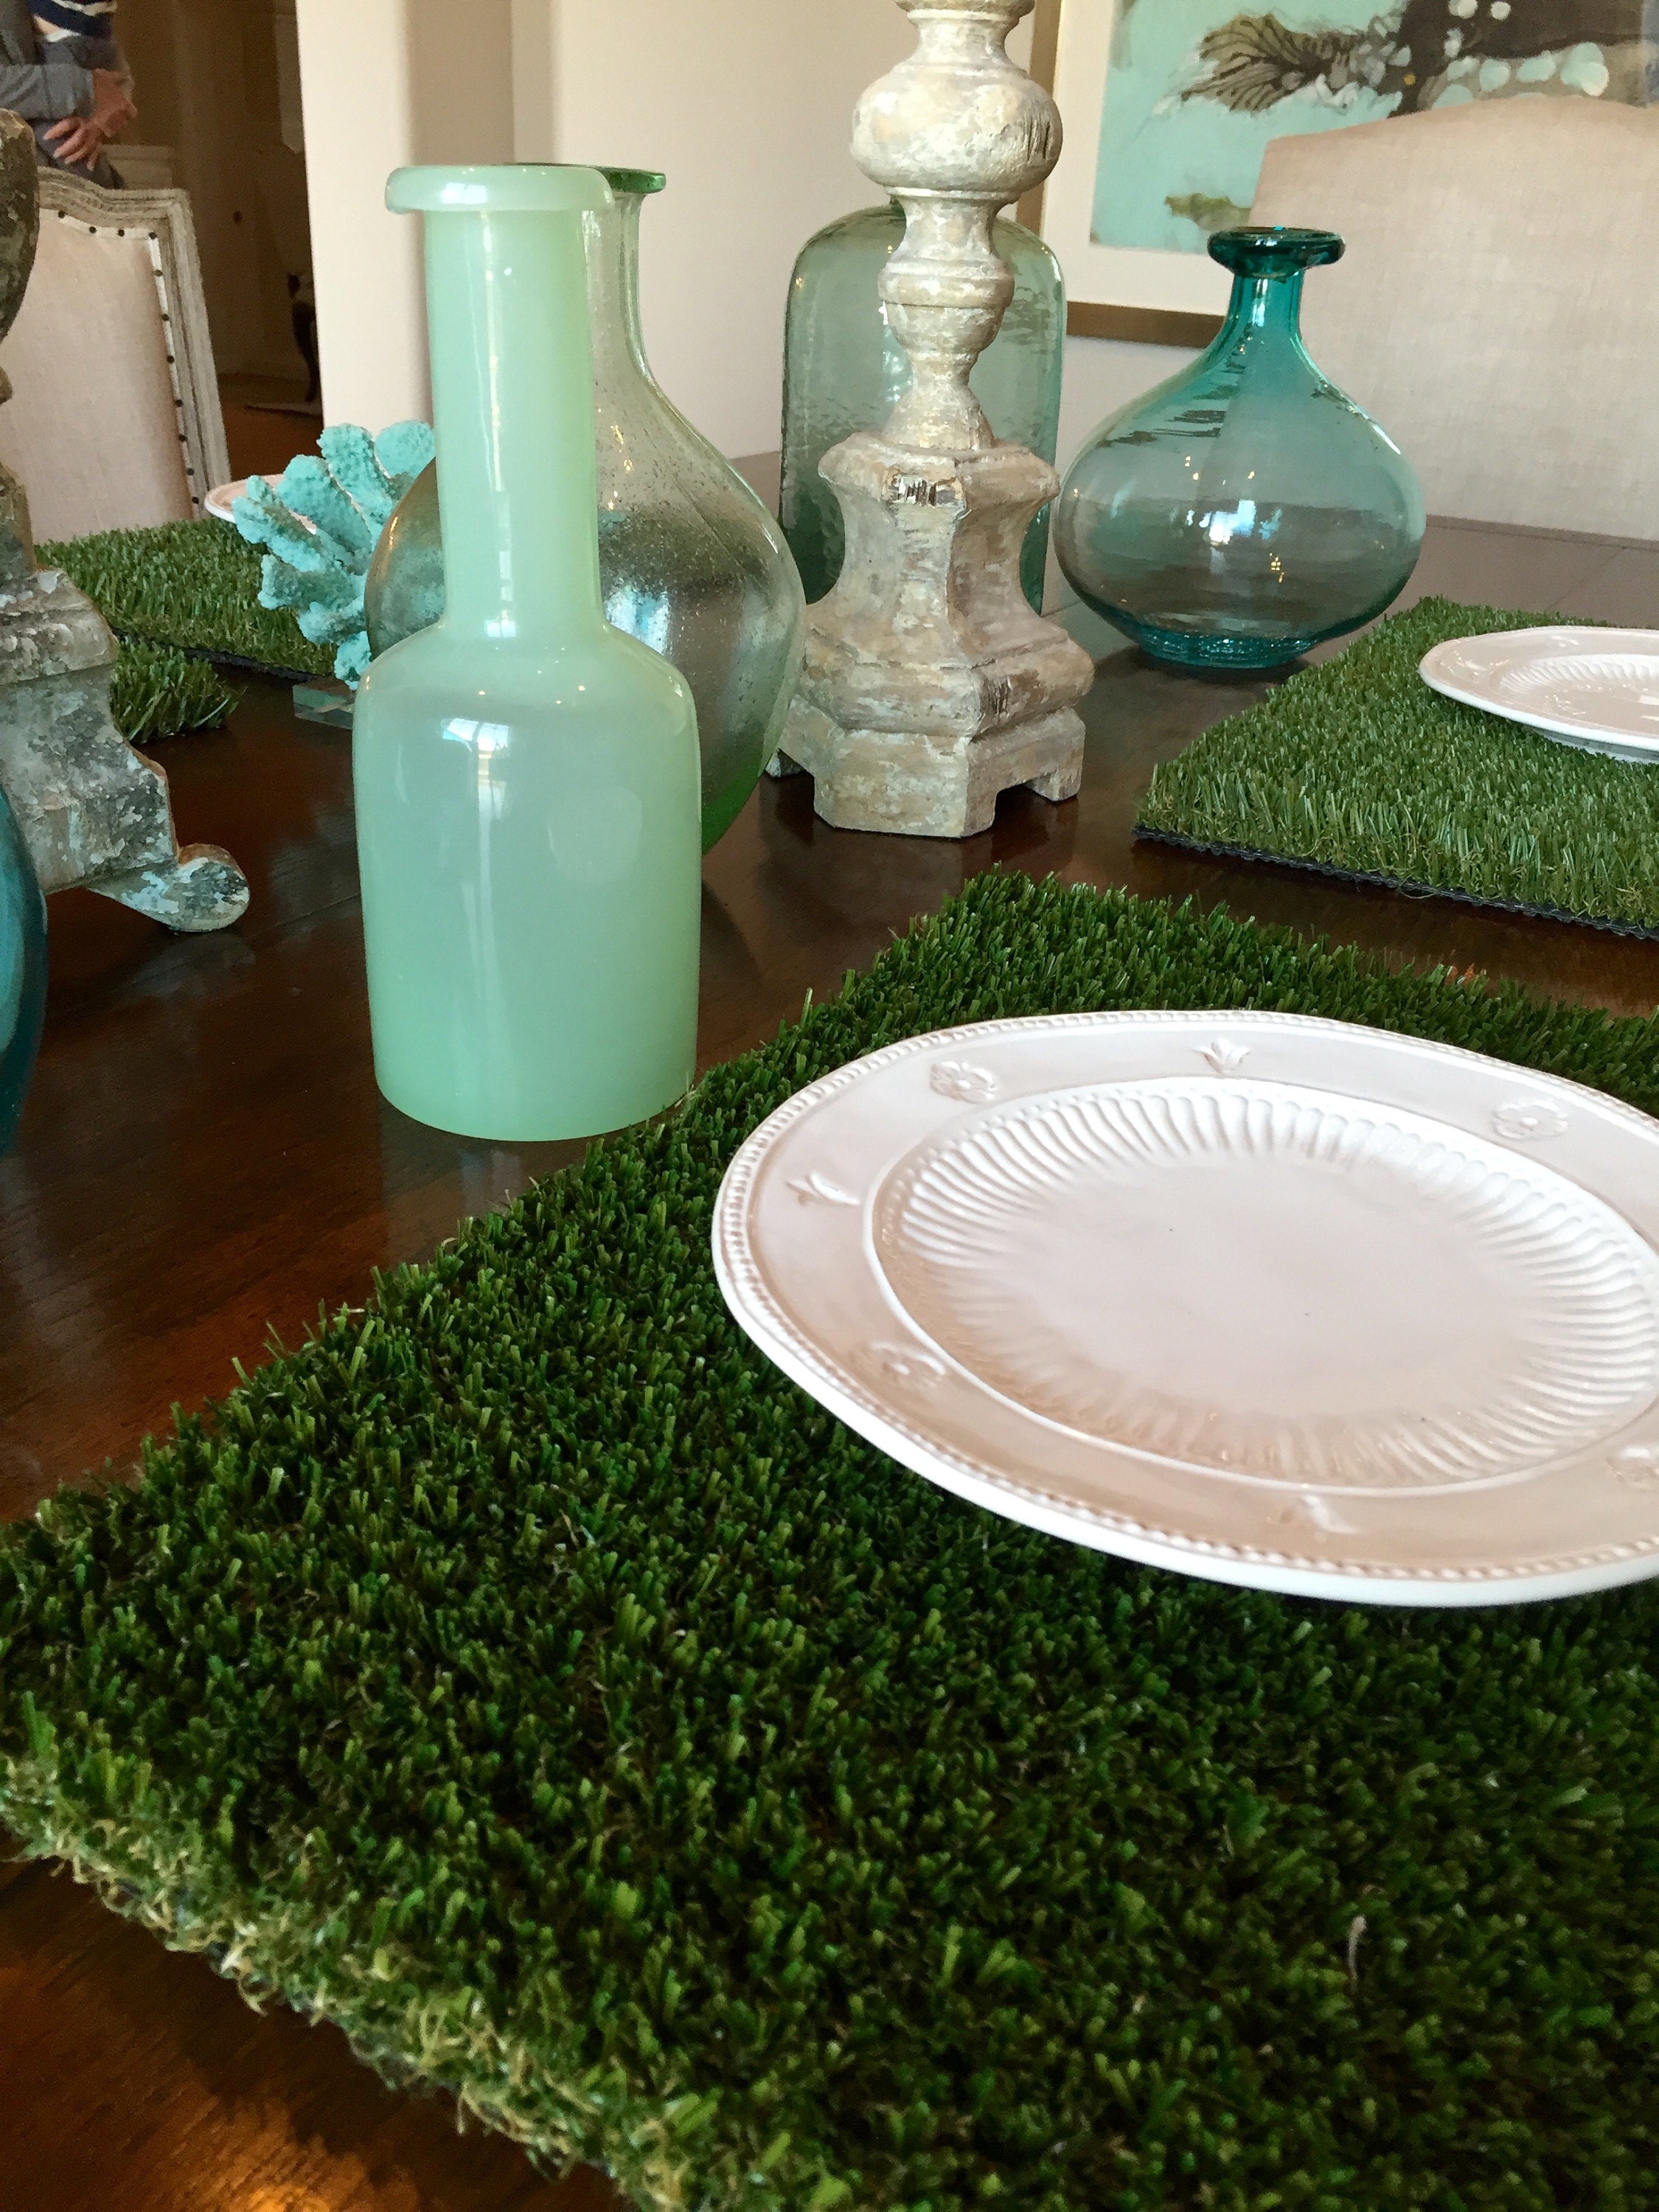 Natural Handmade River Grass Table Runner with 6 Dining Table Mats